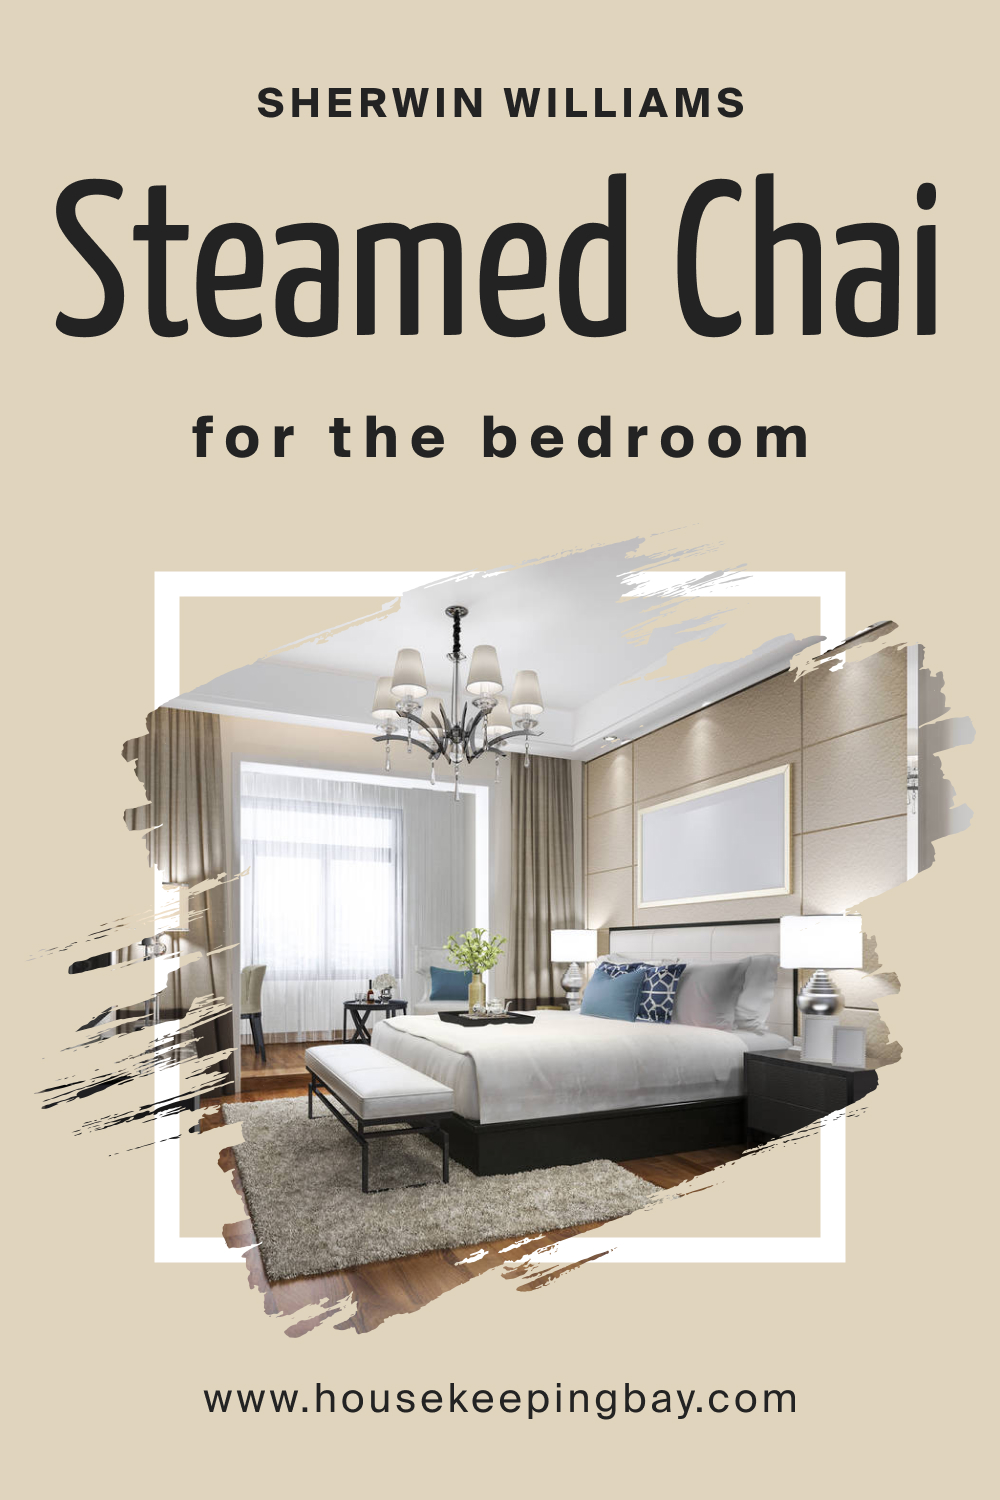 Sherwin Williams. SW 9509 Steamed Chai For the bedroom